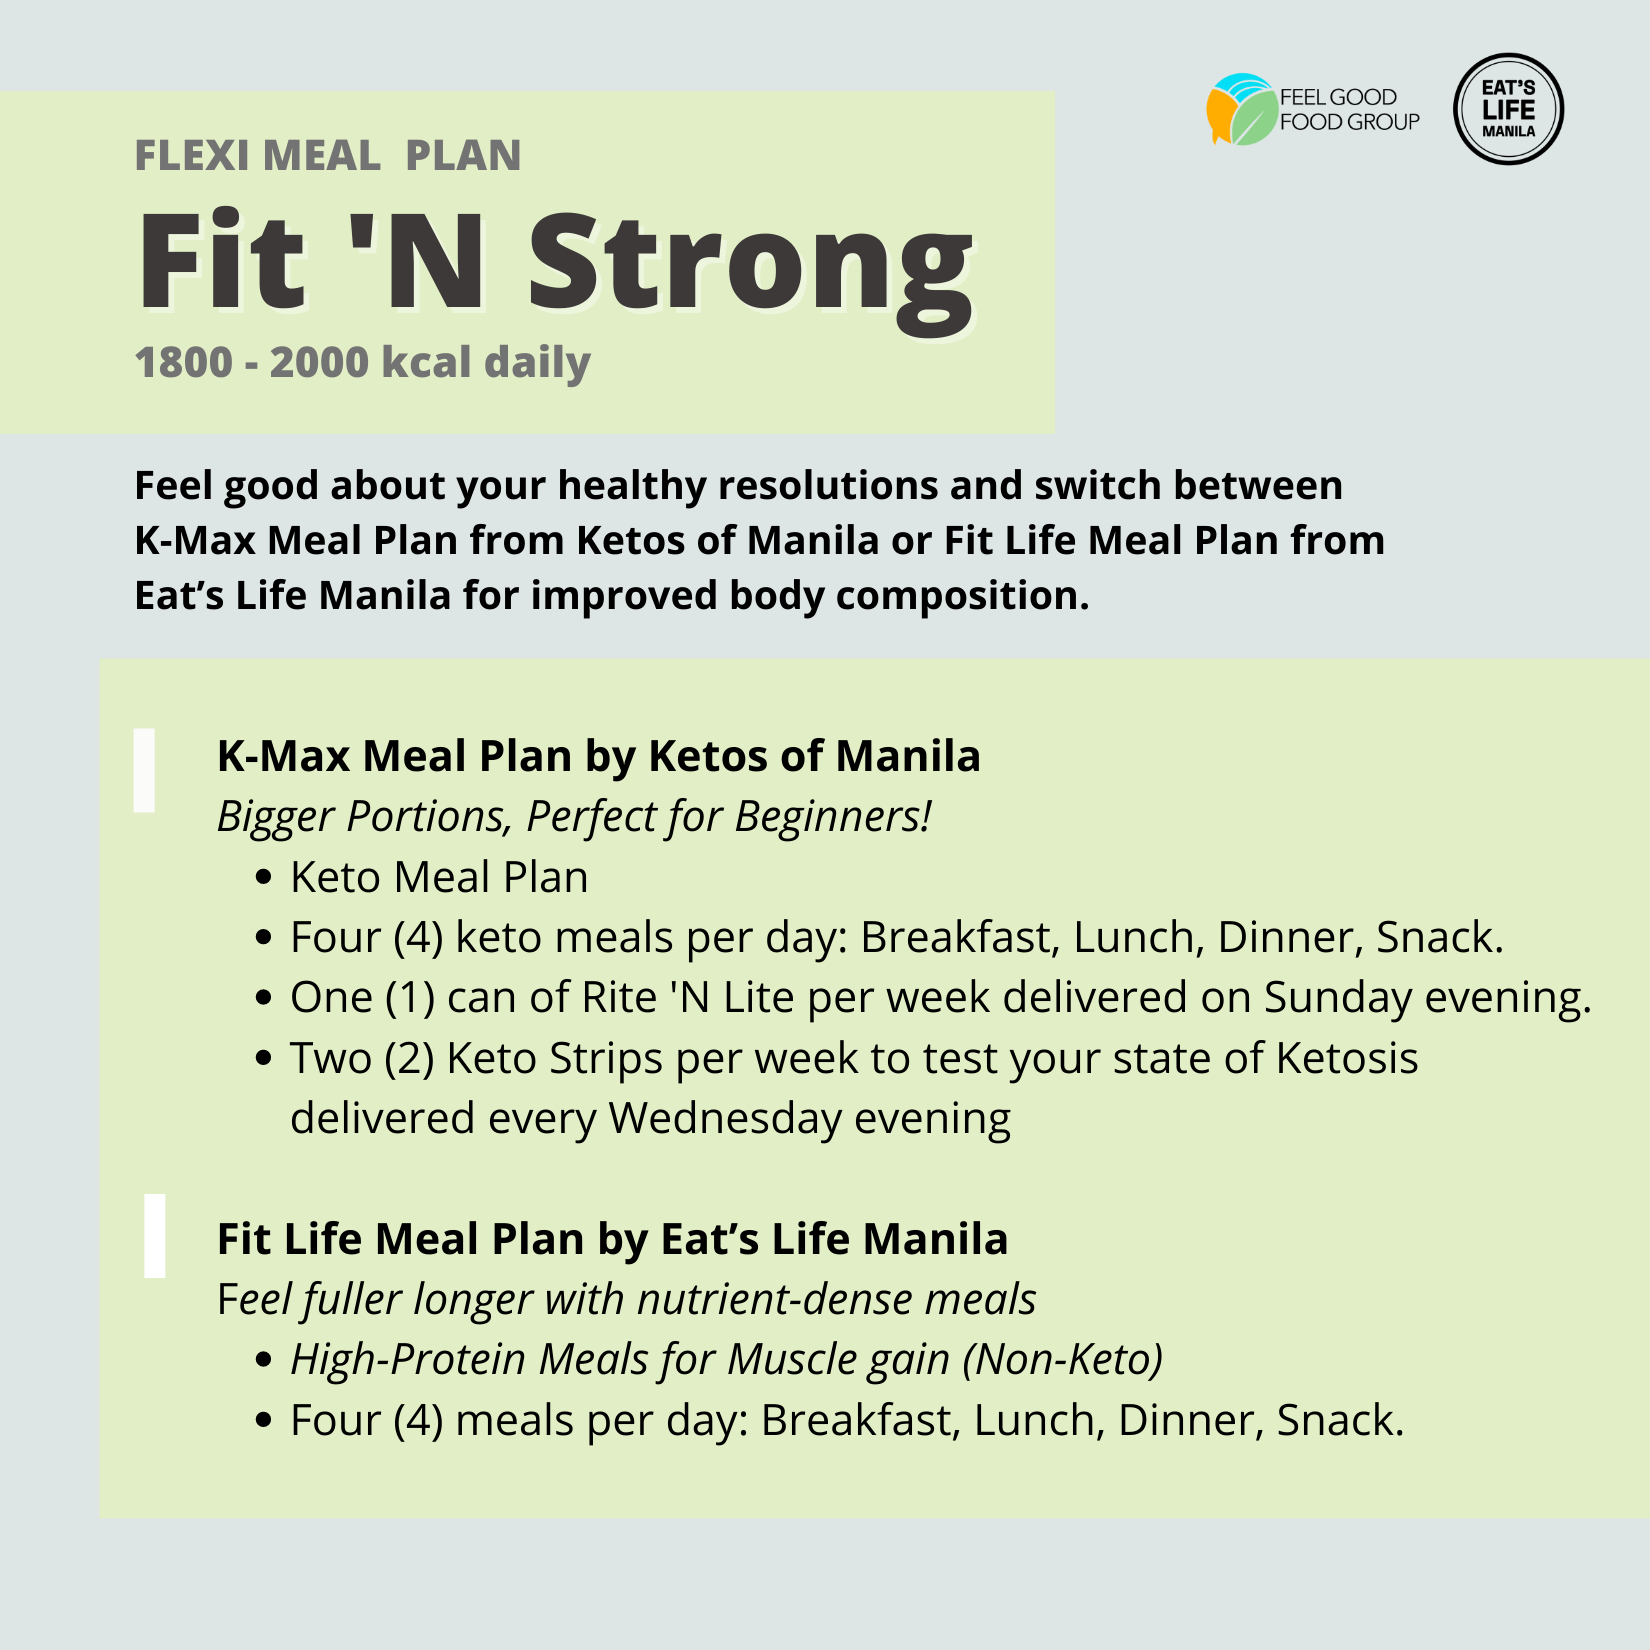 Eats Life Manila | Healthy Diet Manila | Meal Plans Manila | Meal Delivery Service Manila | Affordable Meal Plan Manila | Family Meal Delivery | Ready To Eat Meals |  Food delivery meal plan | Corporate Meals | High Protein Meals